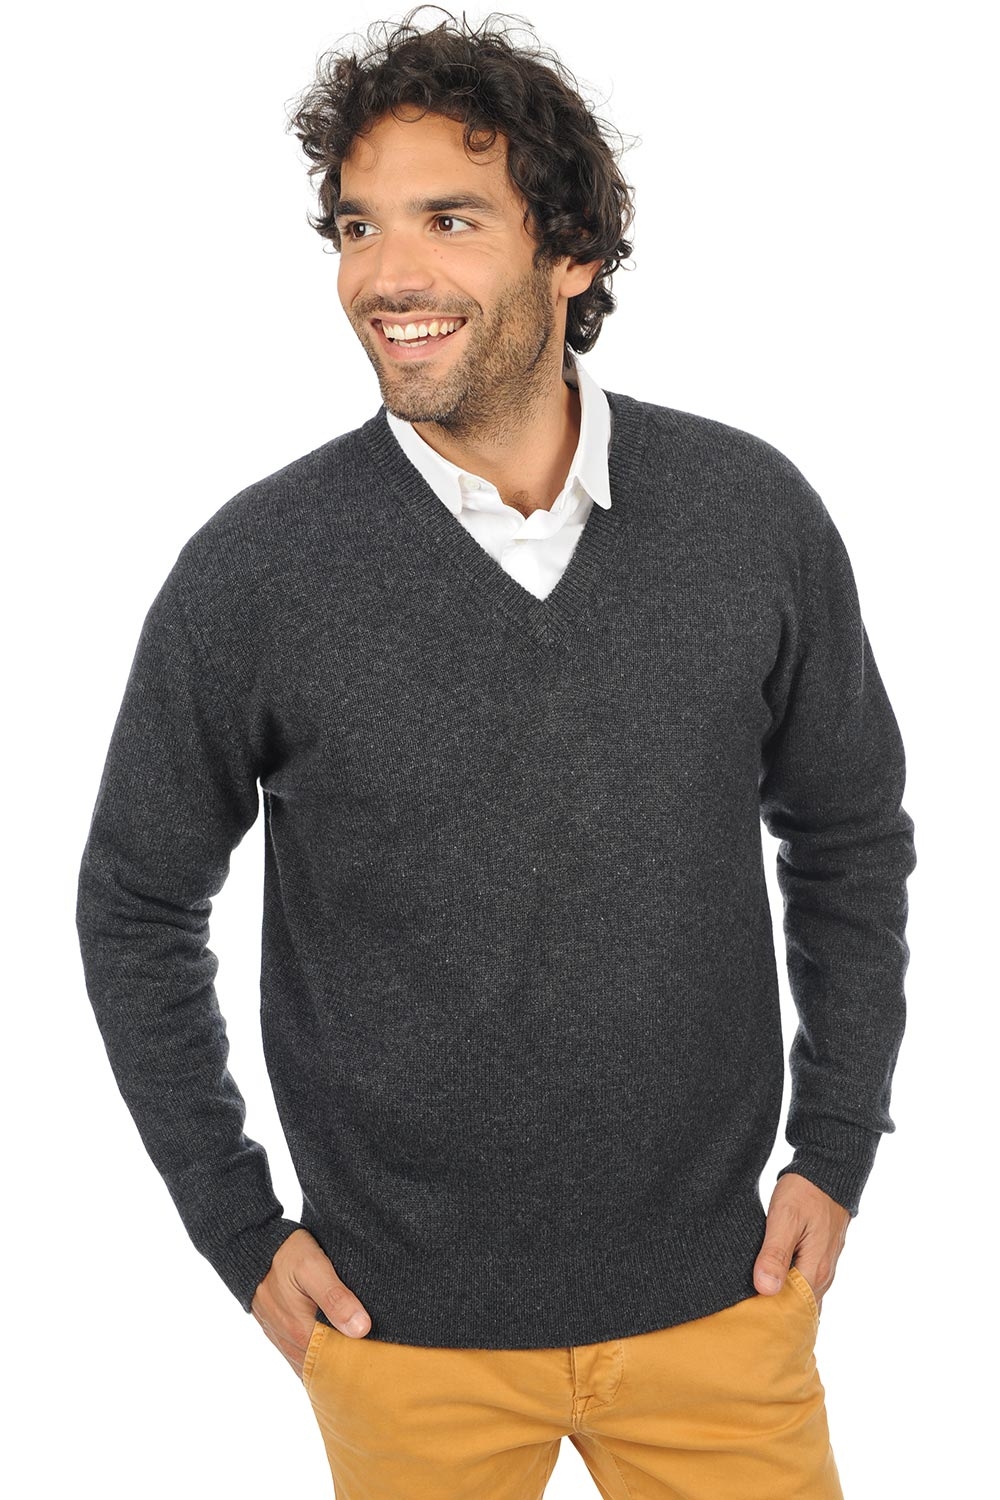 Cashmere men chunky sweater hippolyte 4f charcoal marl 3xl